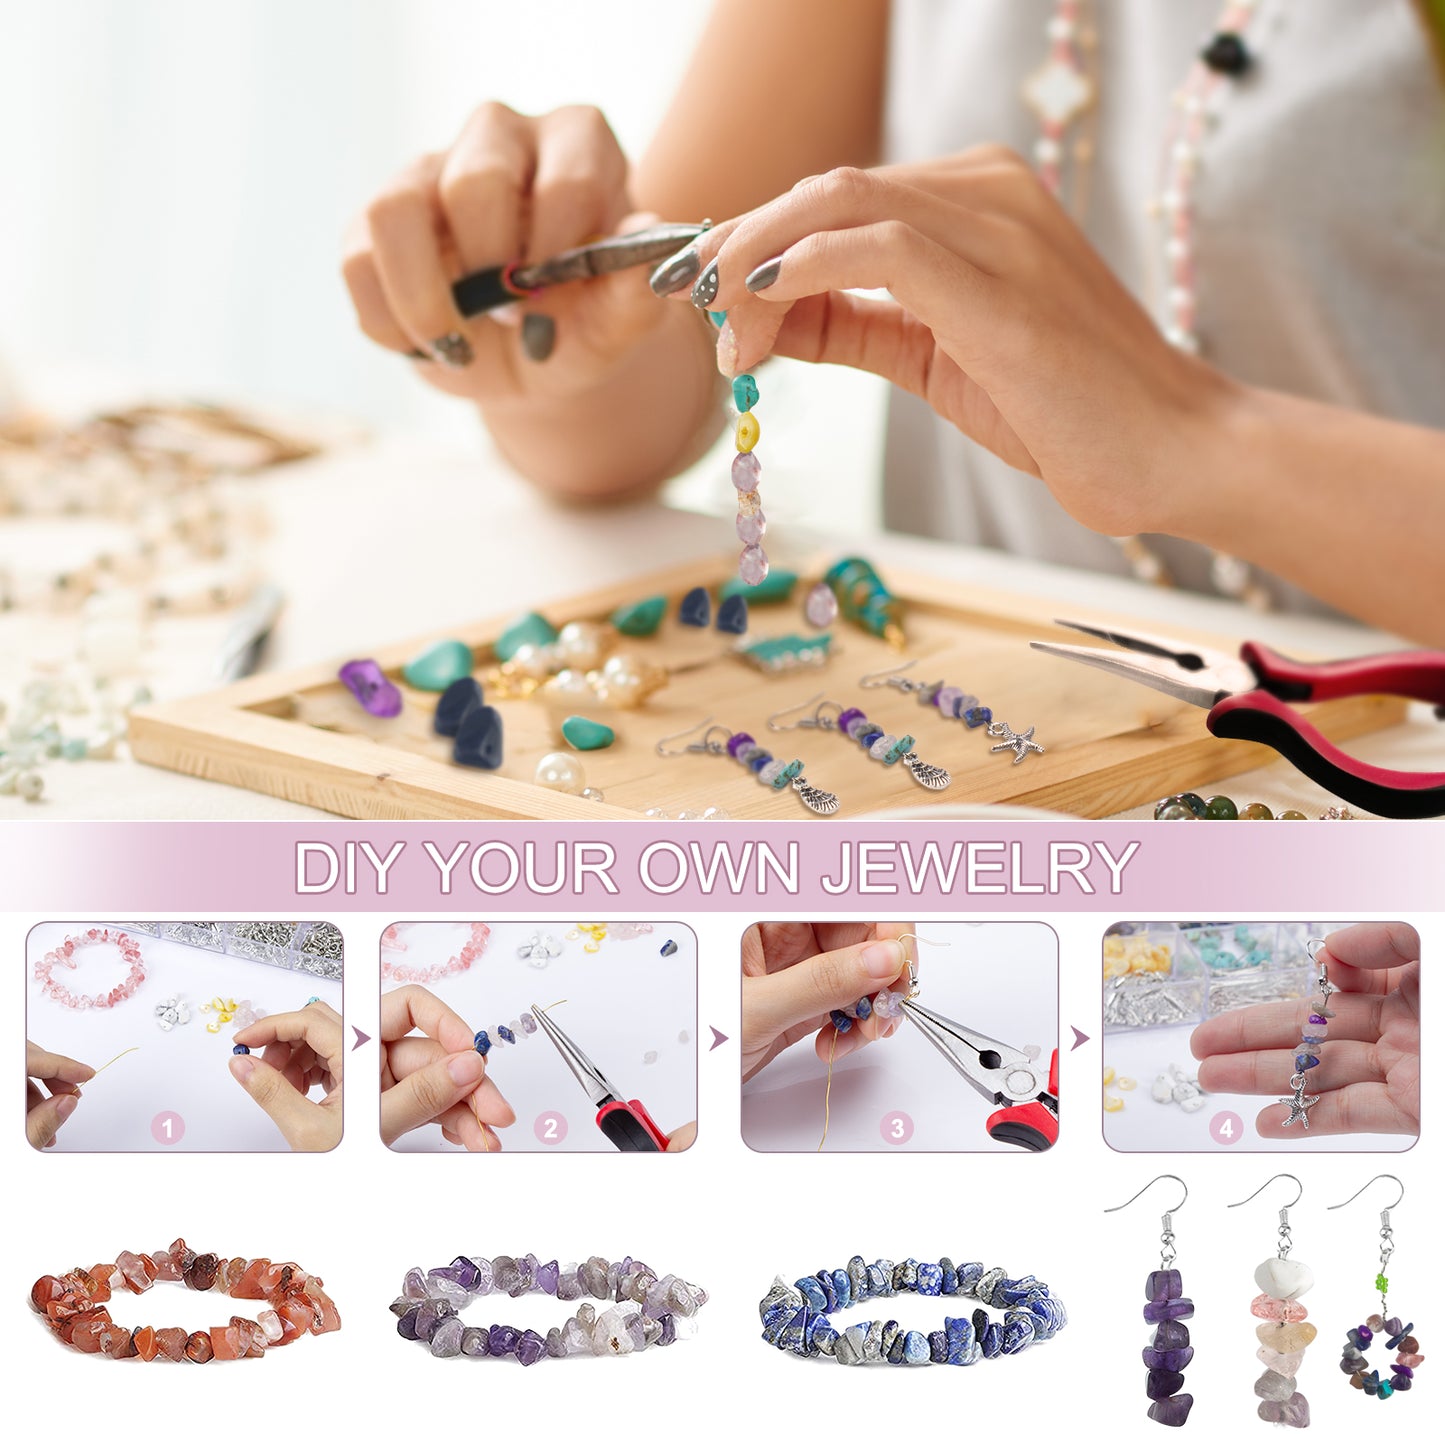 Natural Stone Jewelry Making Kit - Includes Crystal, Chip Beads